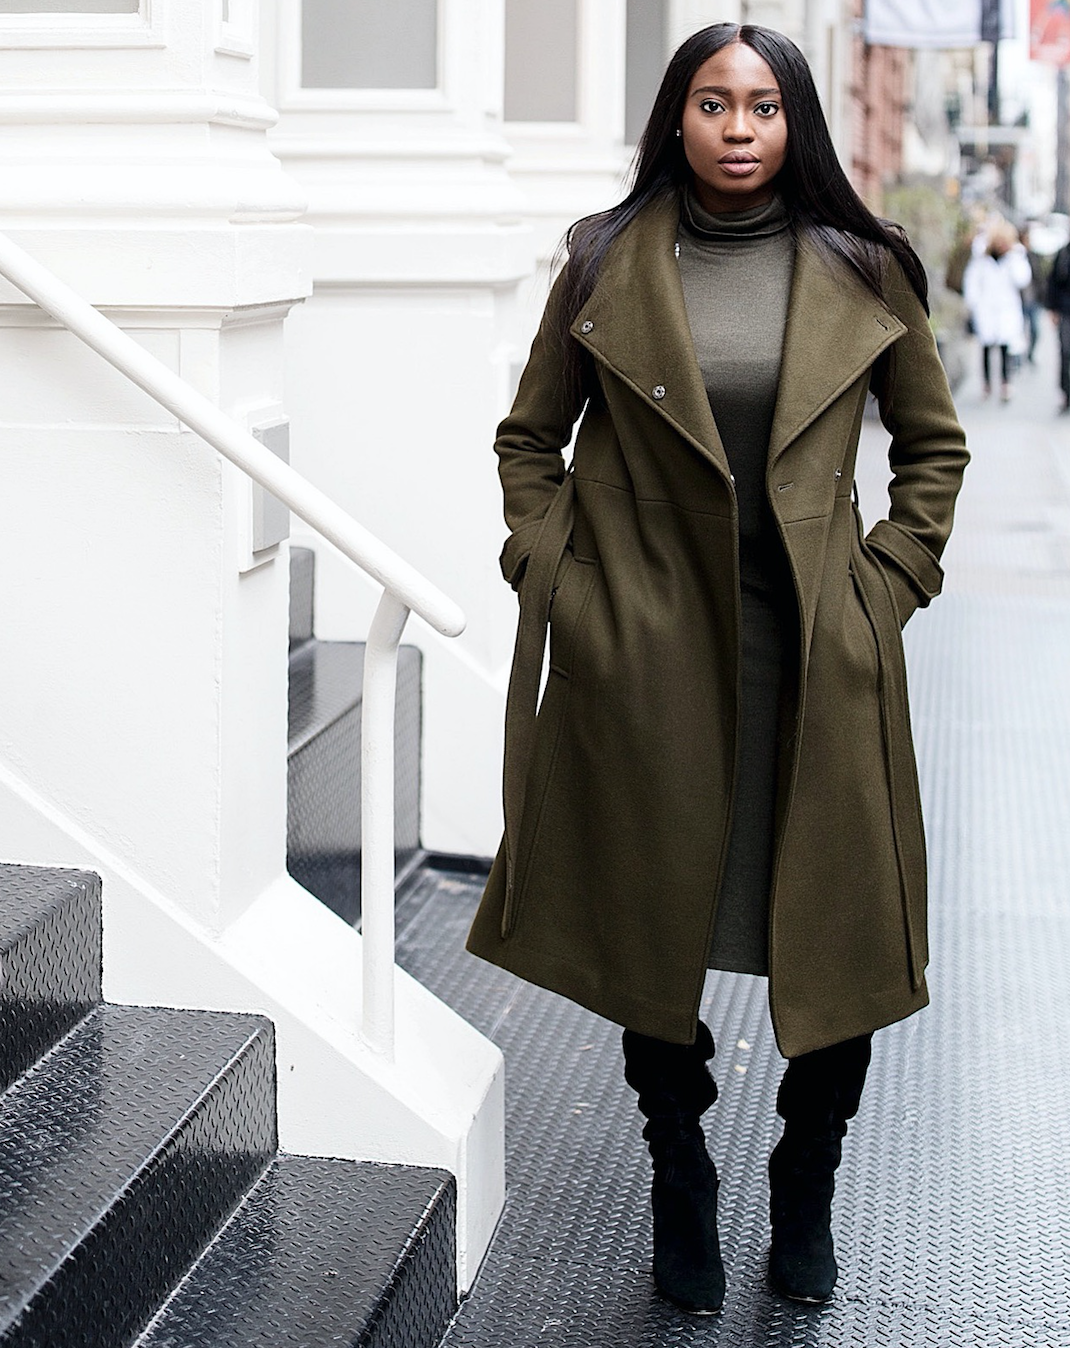 Fashion Bombshell of the Day: Simi from New York